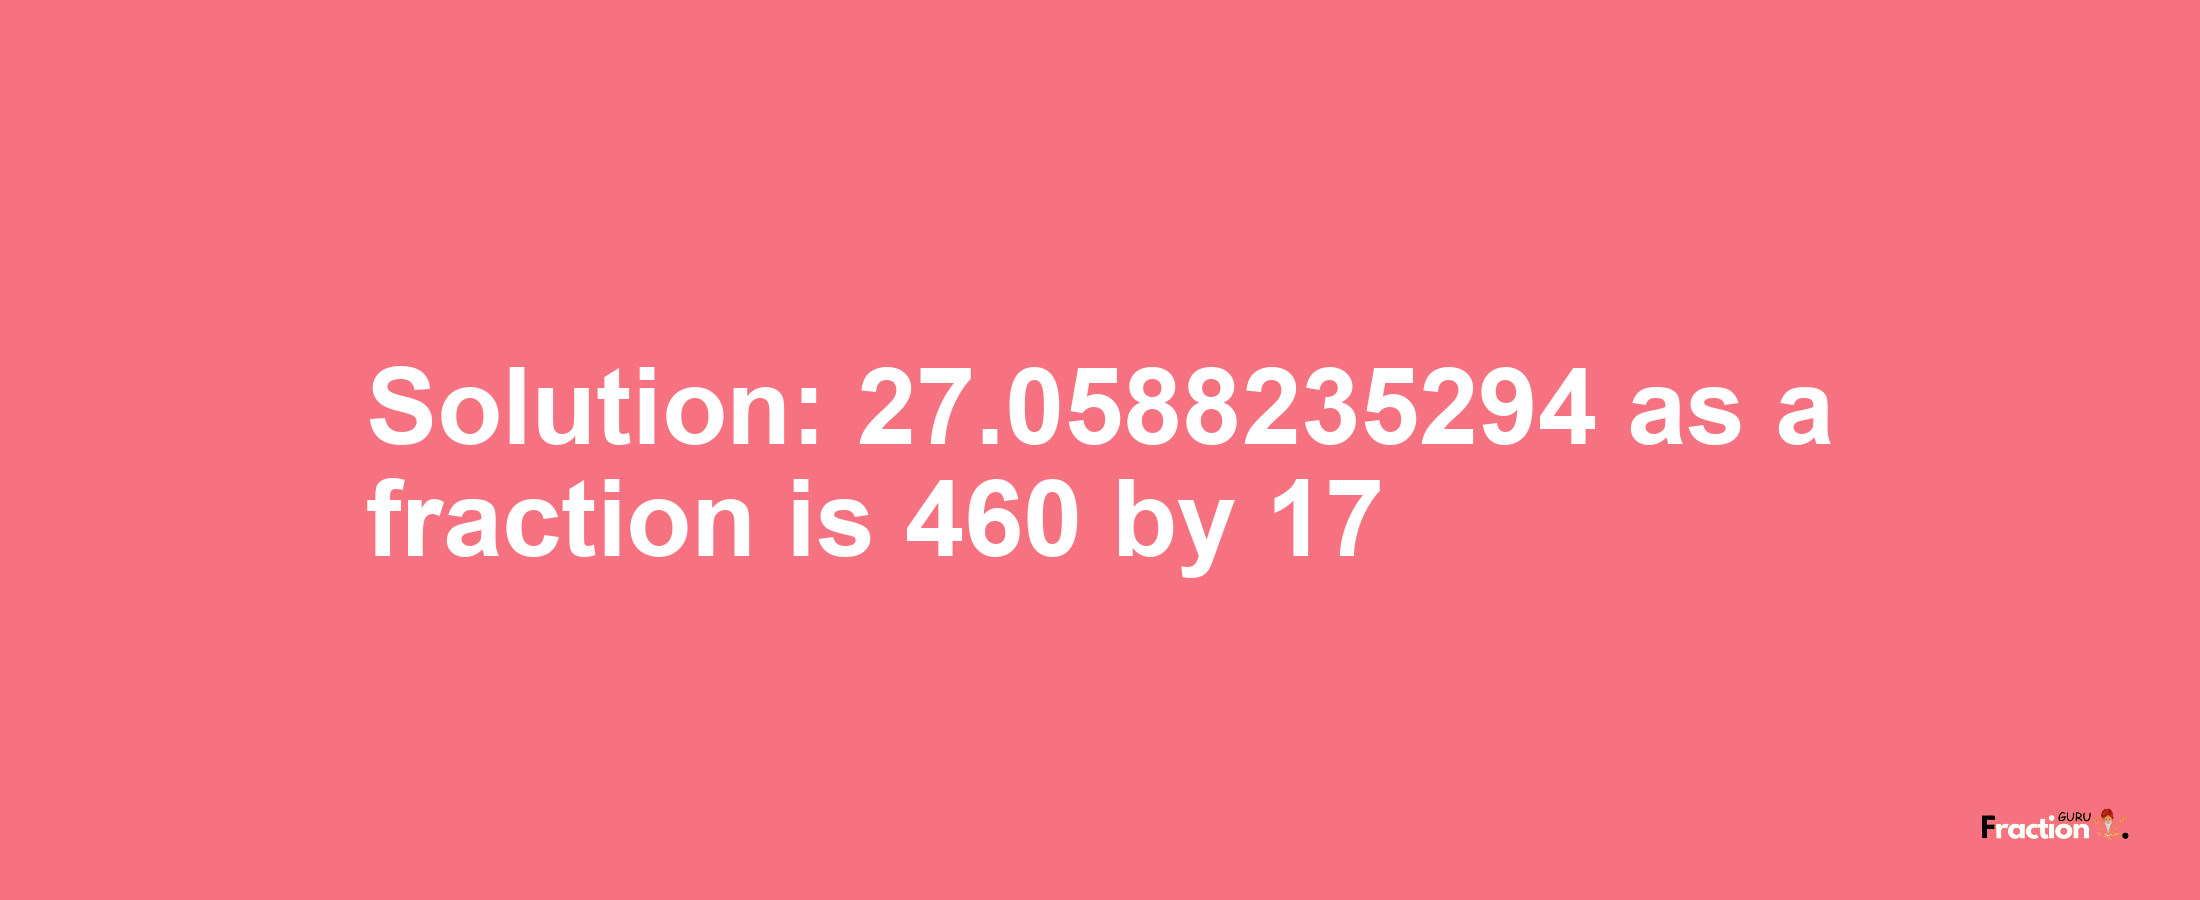 Solution:27.0588235294 as a fraction is 460/17